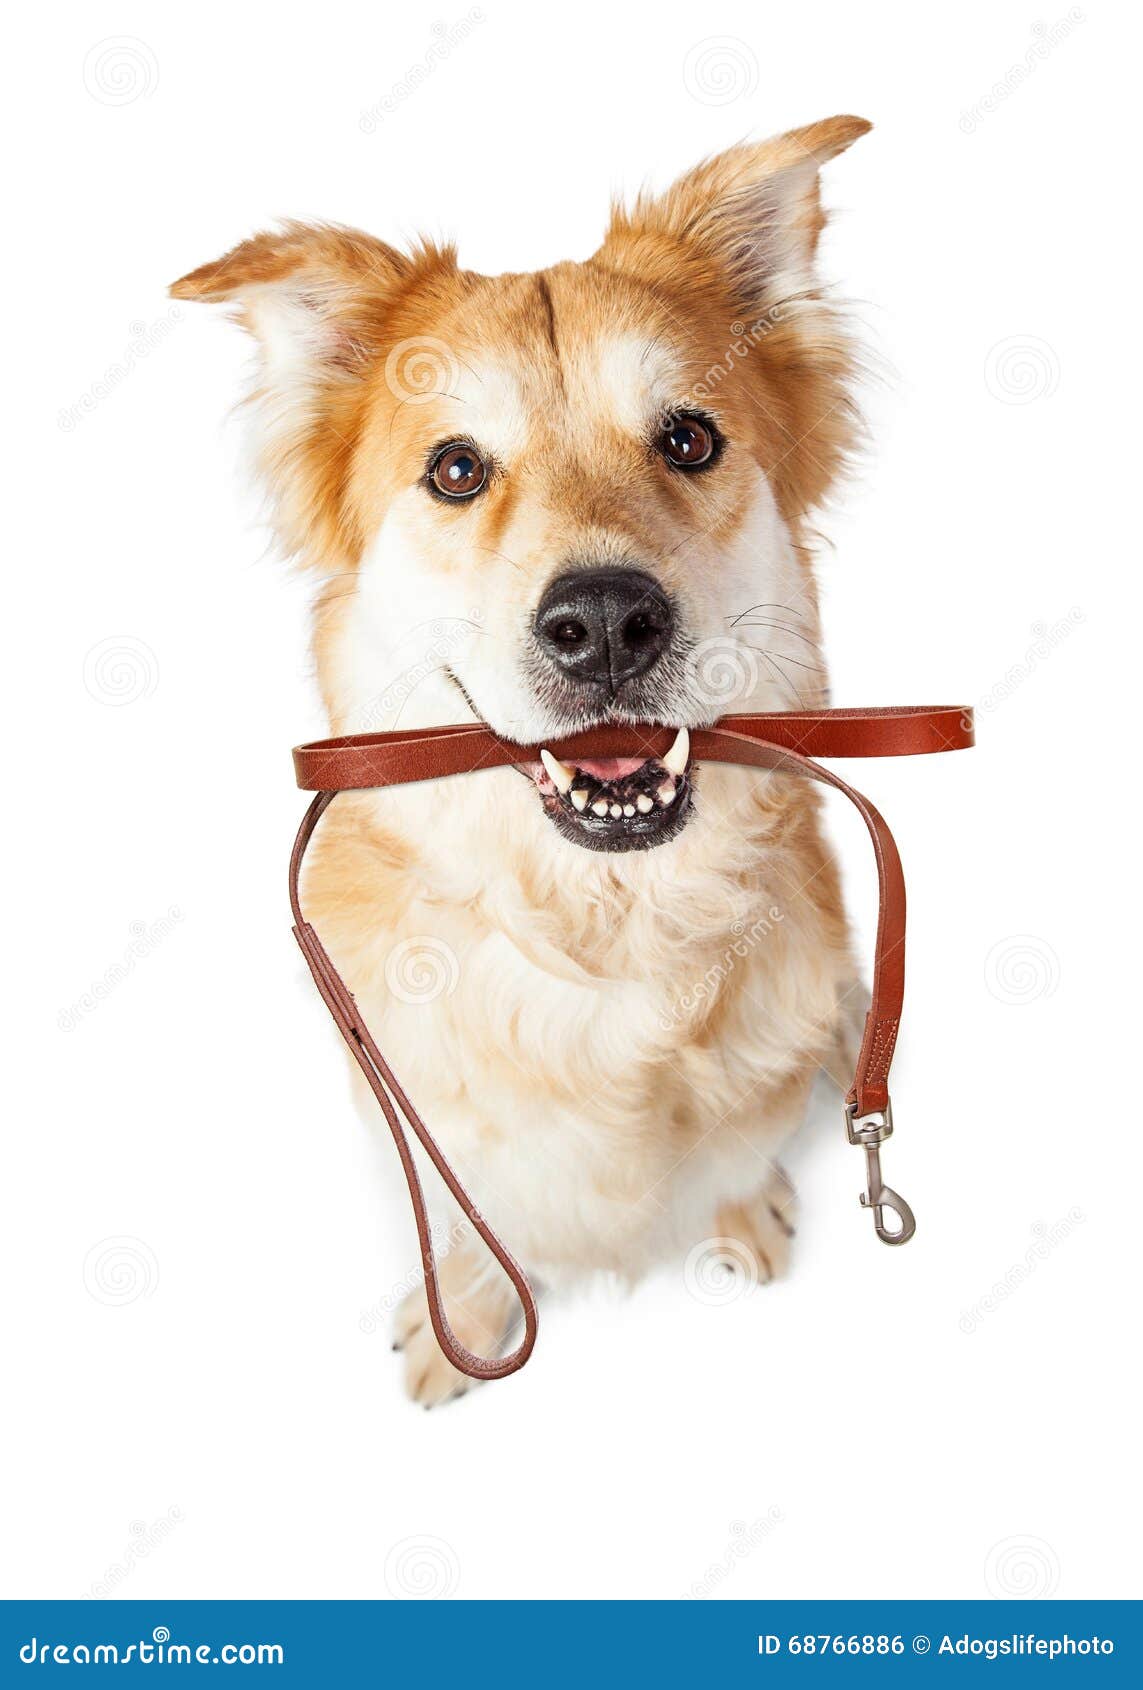 dog with leash in mouth excited for walk